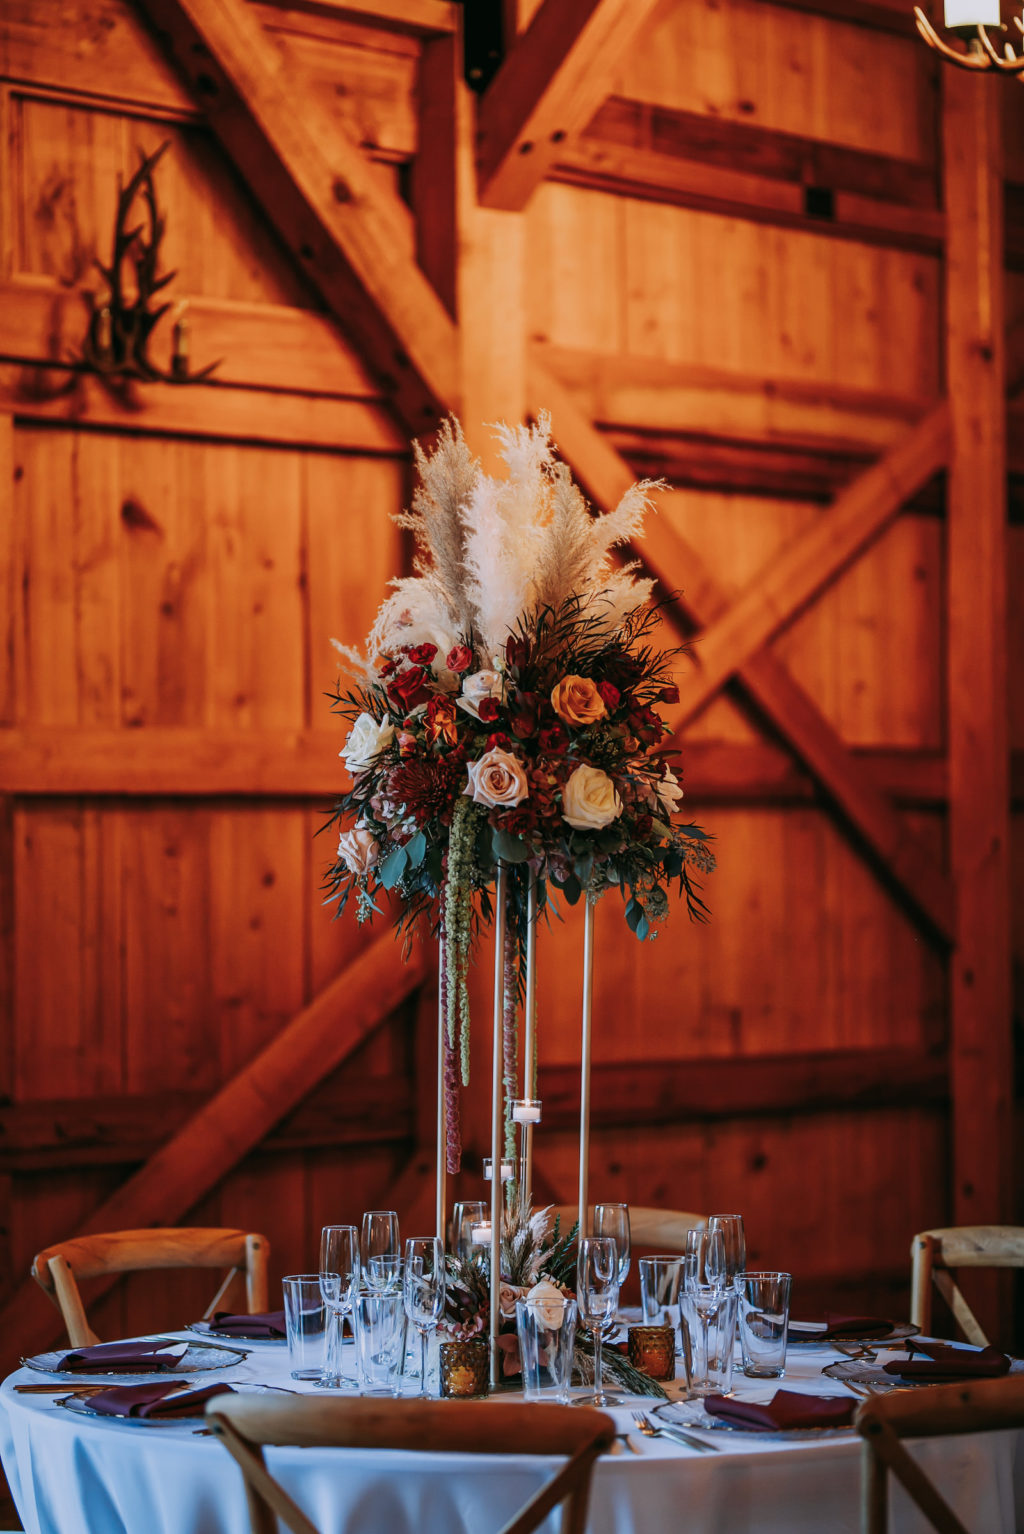 Rustic Barn Wedding Reception Decor, Tall Geometric Stand with Lush Floral Centerpiece, Pampas Grass, Hanging Amaranthus, Blush and Orange Roses, Burgundy Flowers, Wooden Cross Back Chairs